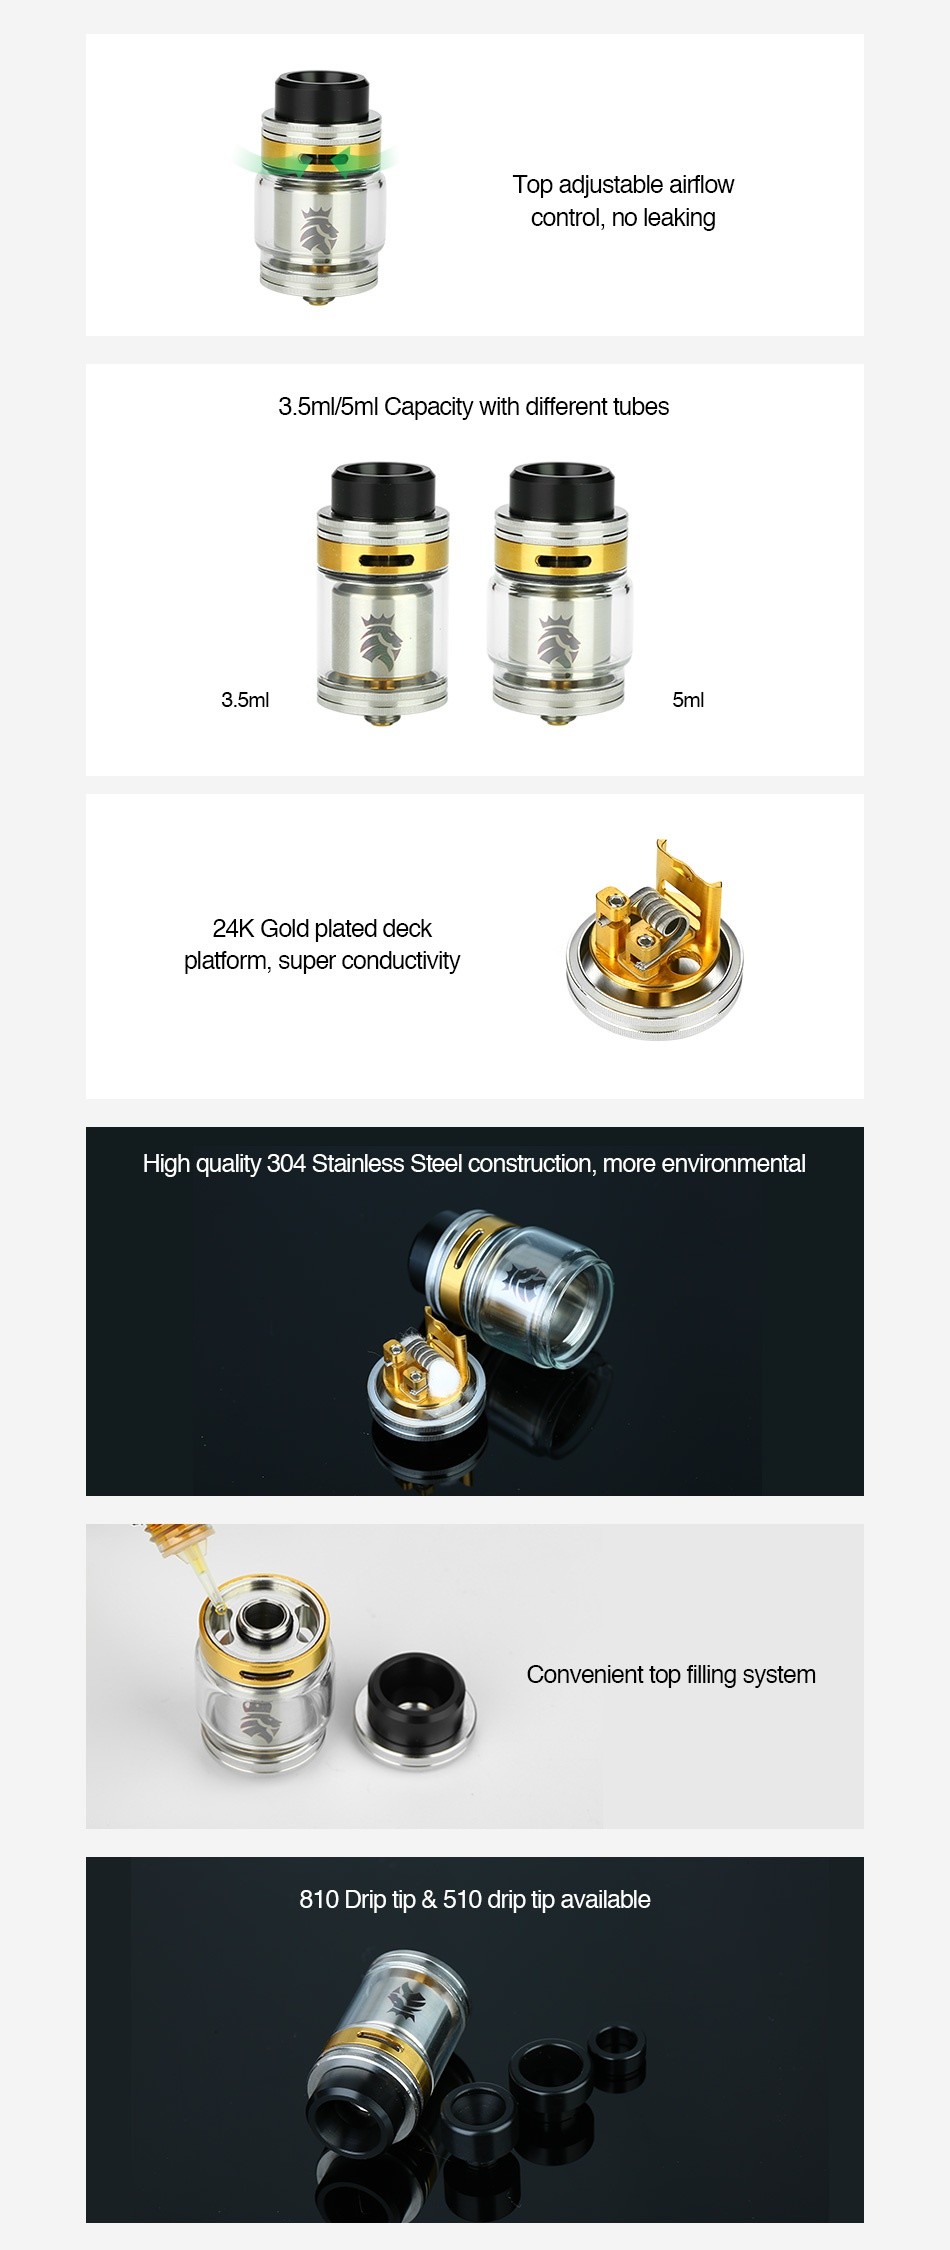 KAEES Solomon 2 RTA 5ml Top adjustable airflow control no leaking 3 5ml 5ml capacity with different tubes 24K Gold plated deck platform  super conductivity High quality 304 Stainless Steel construction  more environmental Convenient top filling system 810 Drip tip  510 drip tip available